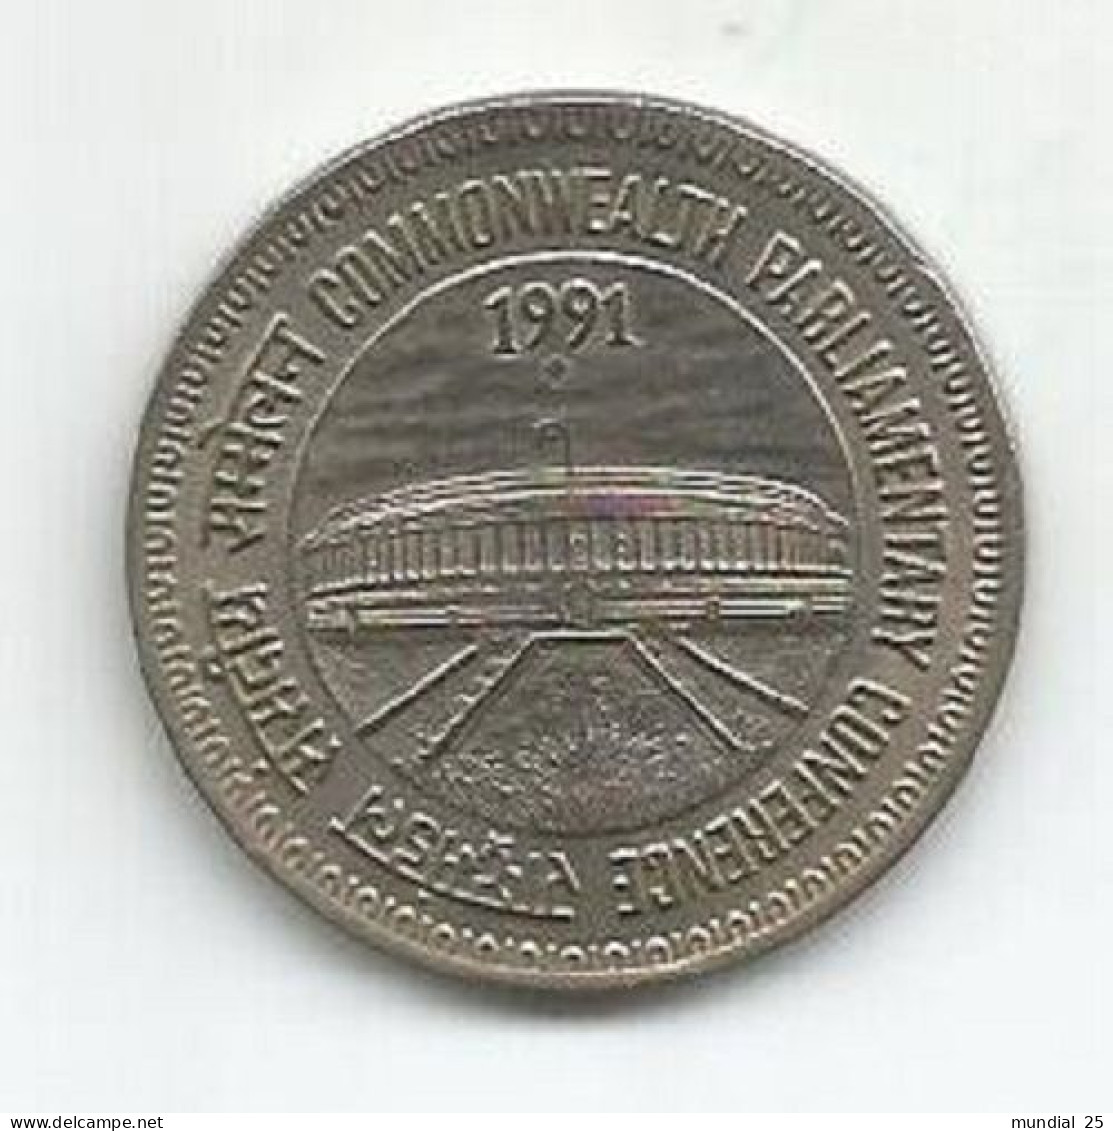 INDIA 1 RUPEE 1991 - COMMONWEALTH PARLIAMENTARY CONFERENCE - Inde